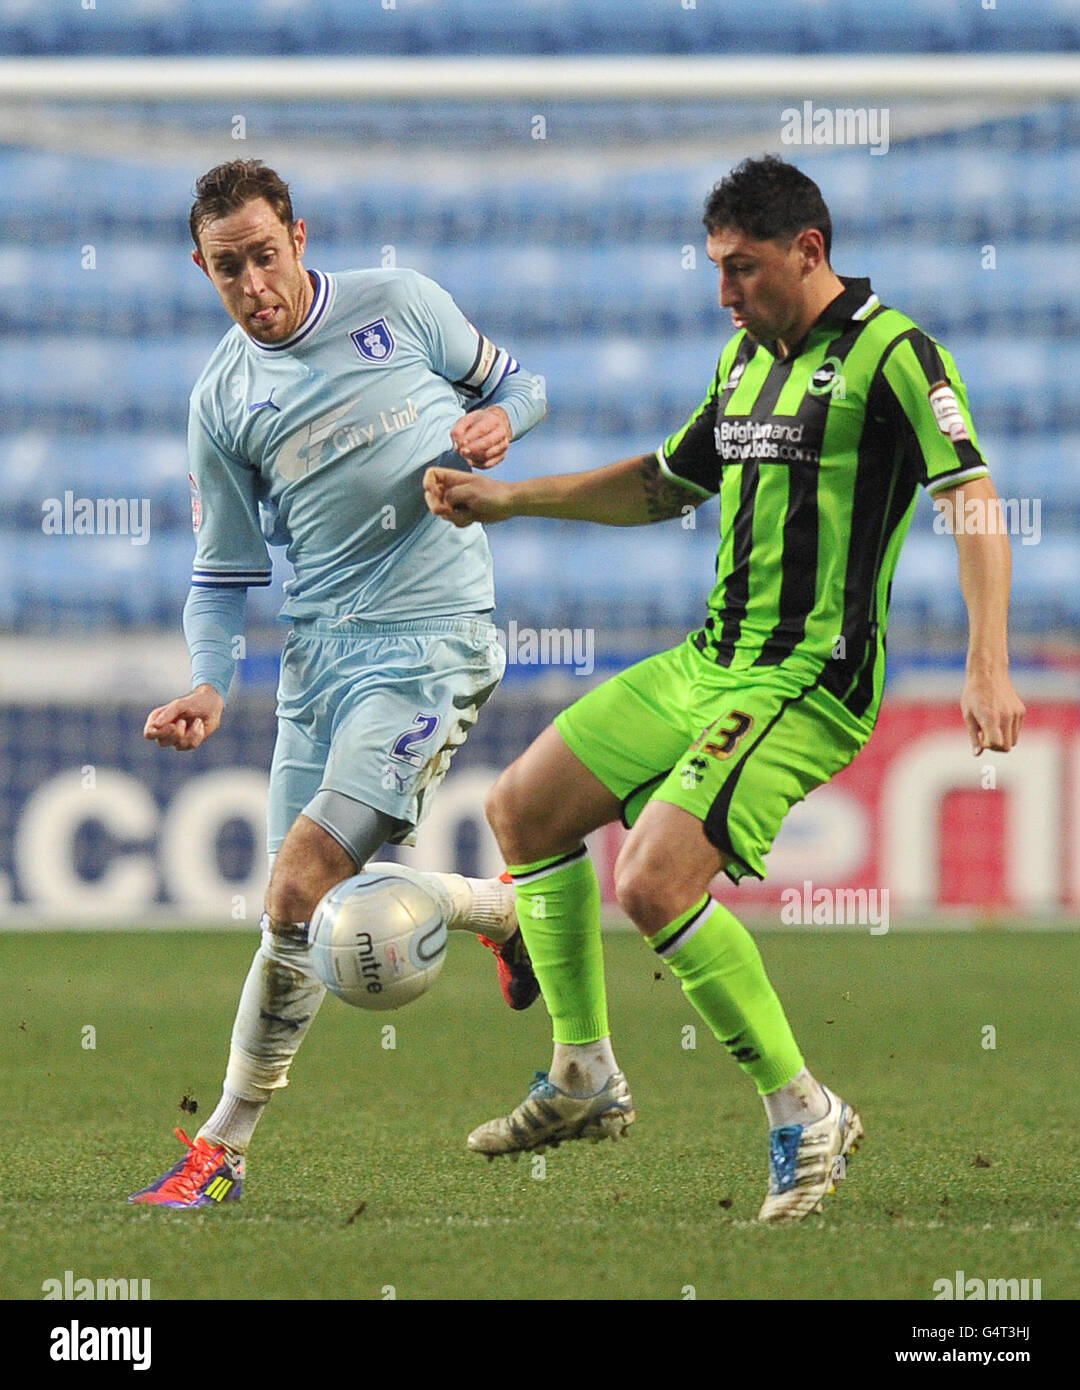 Coventry City's Richard Keogh and Brighton & Hove Albion's Billy Paynter battle for the ball during the npower Championship match at the Ricoh Arena, Coventry. Stock Photo